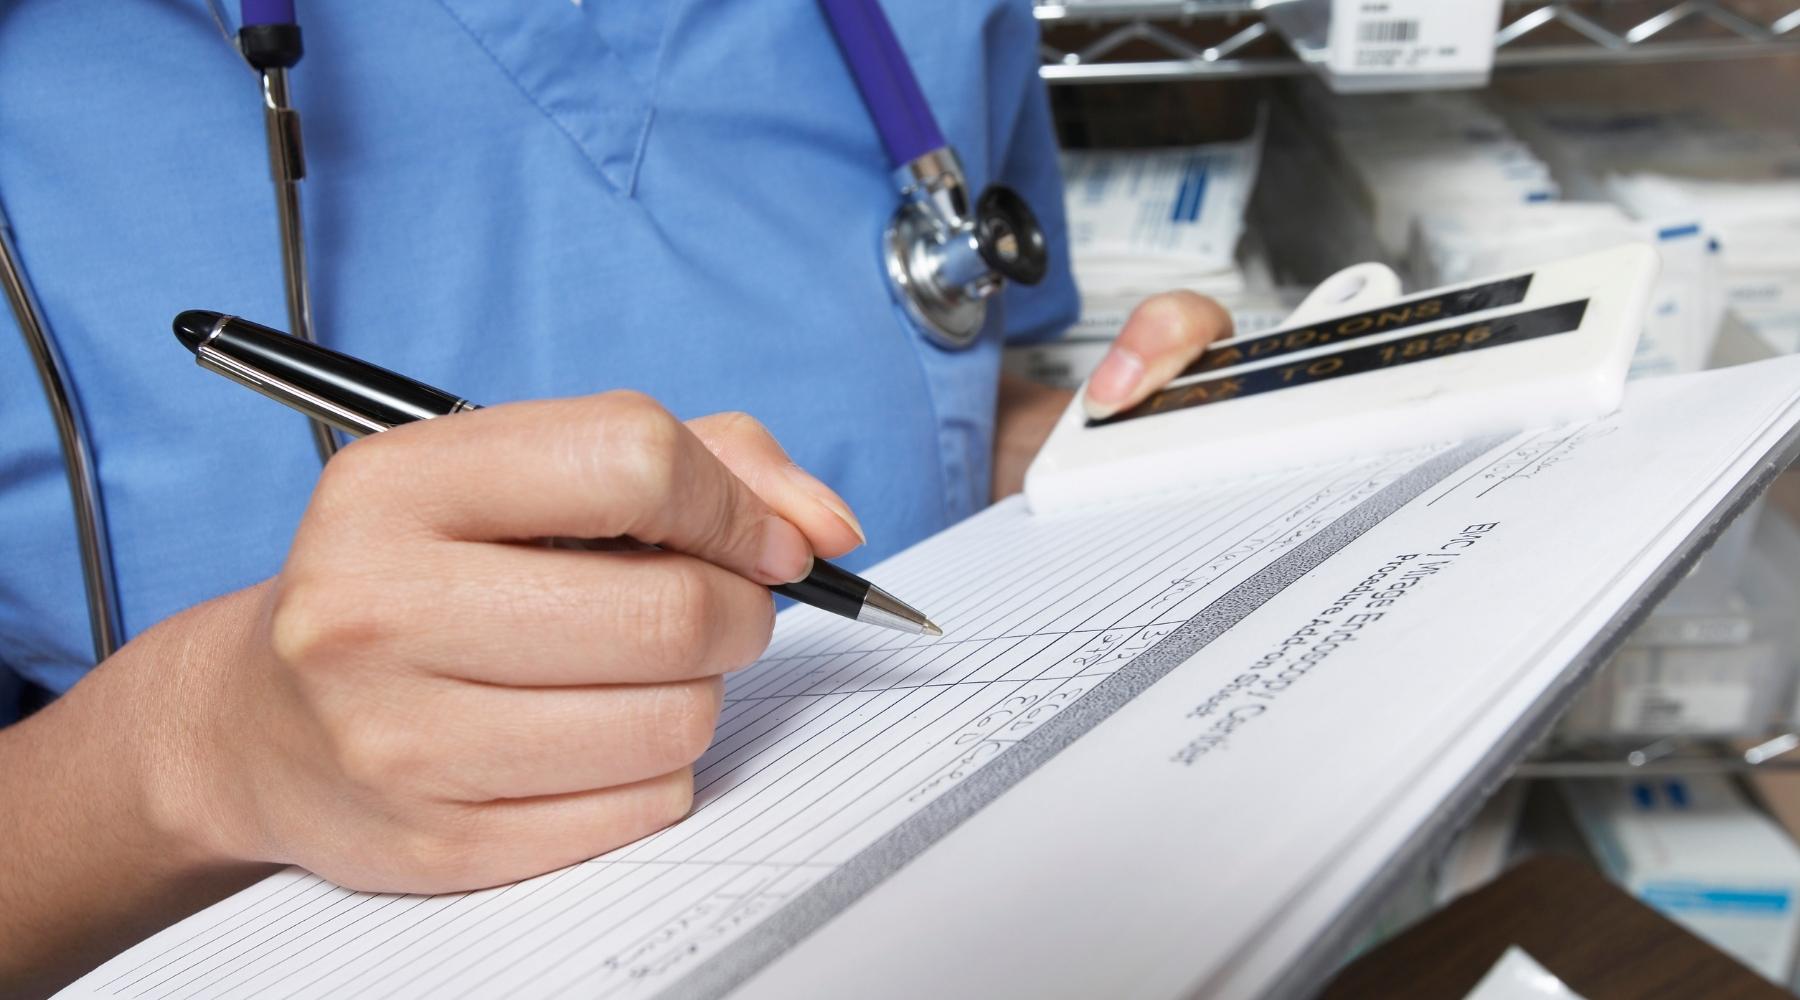 Good Record Keeping and College of Nurses Complaints